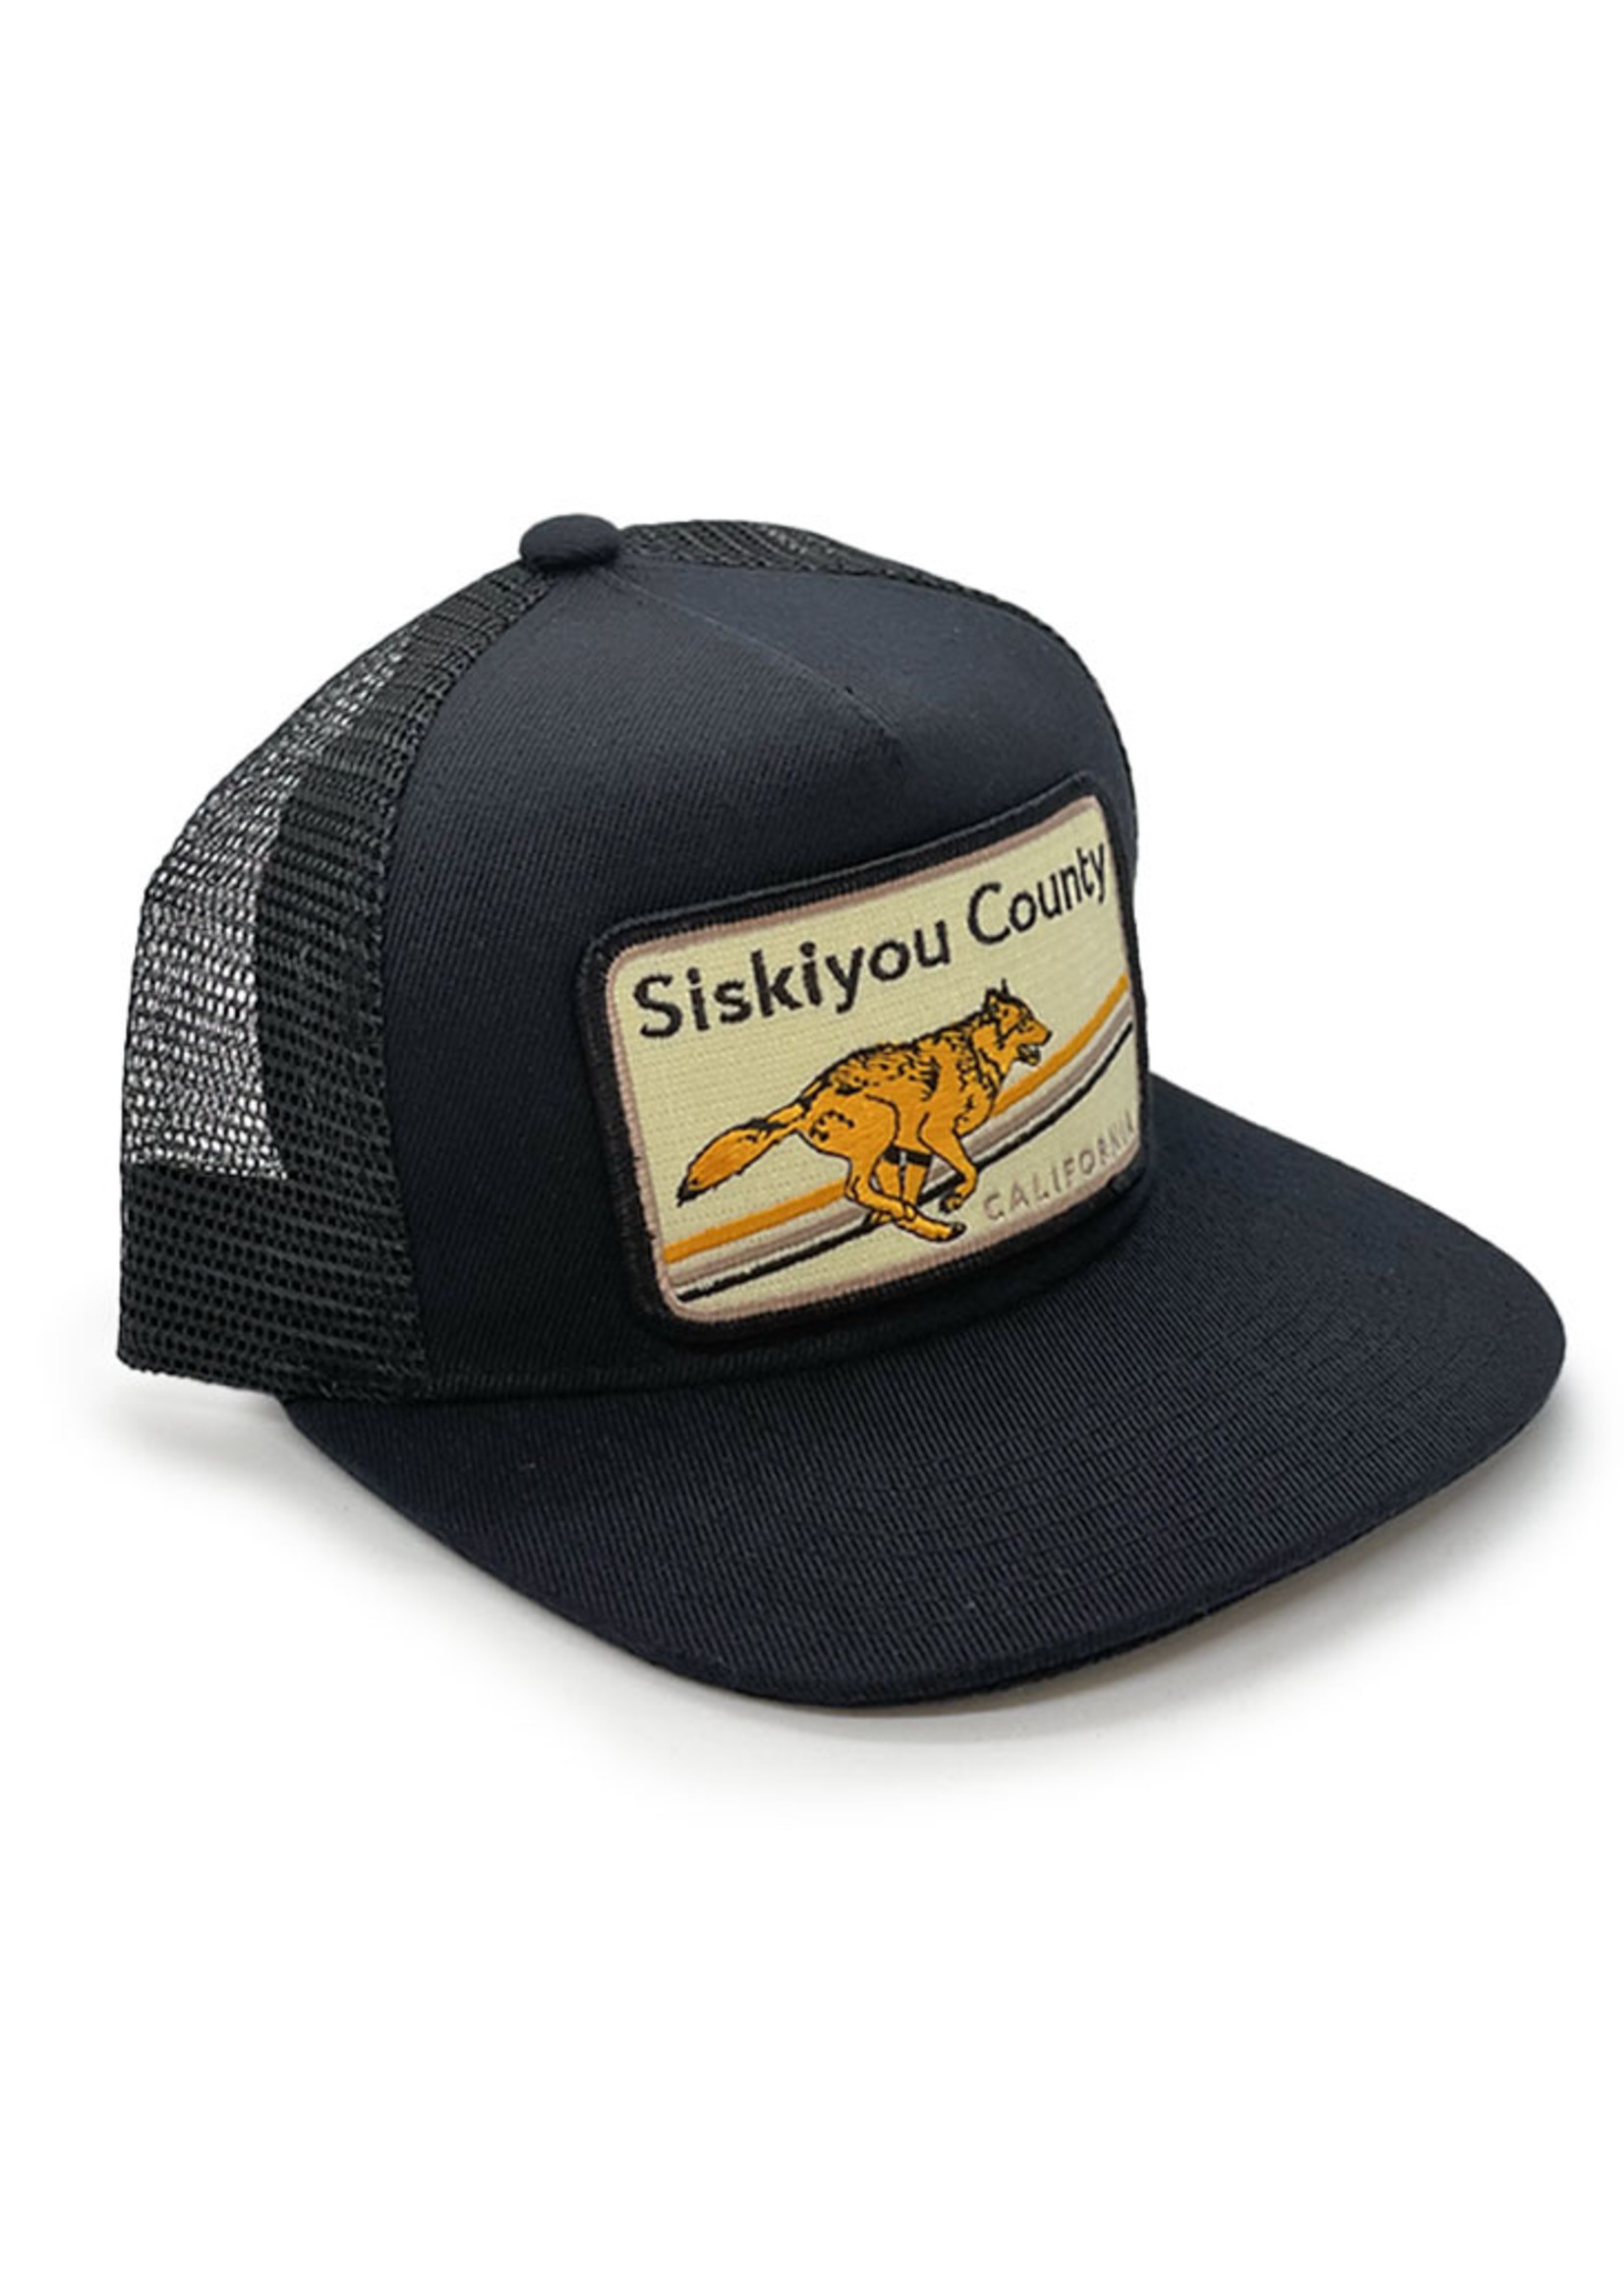 California Trucker Hat  by Famous Pocket - Enjoy the Store - Purveyors Of  Locally, Regionally and American made Hand Crafted Goods.